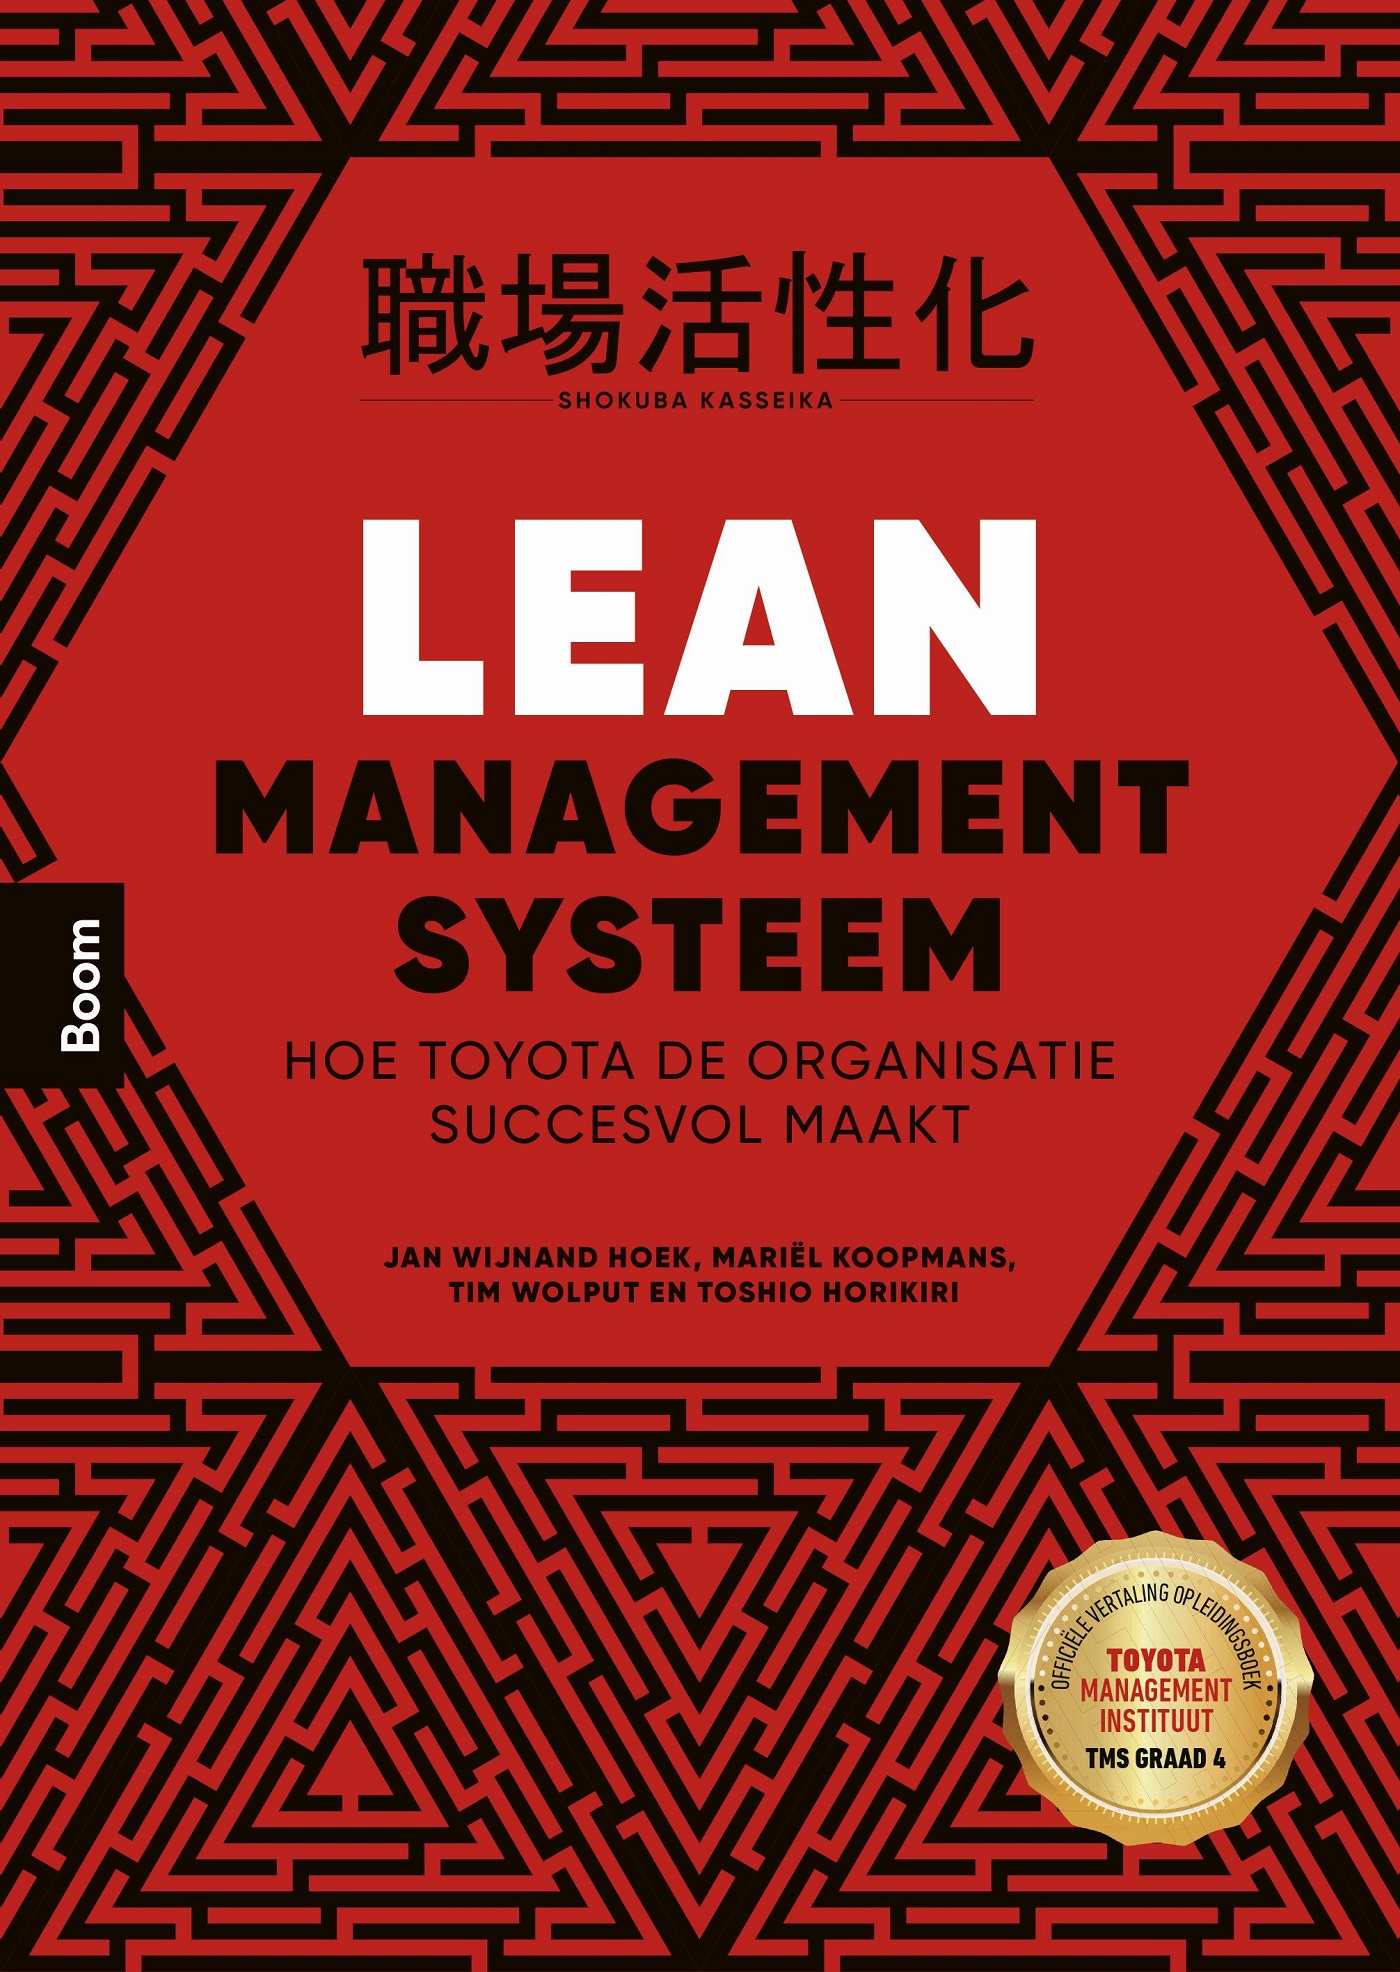 Lean Management Systeem (Ebook)